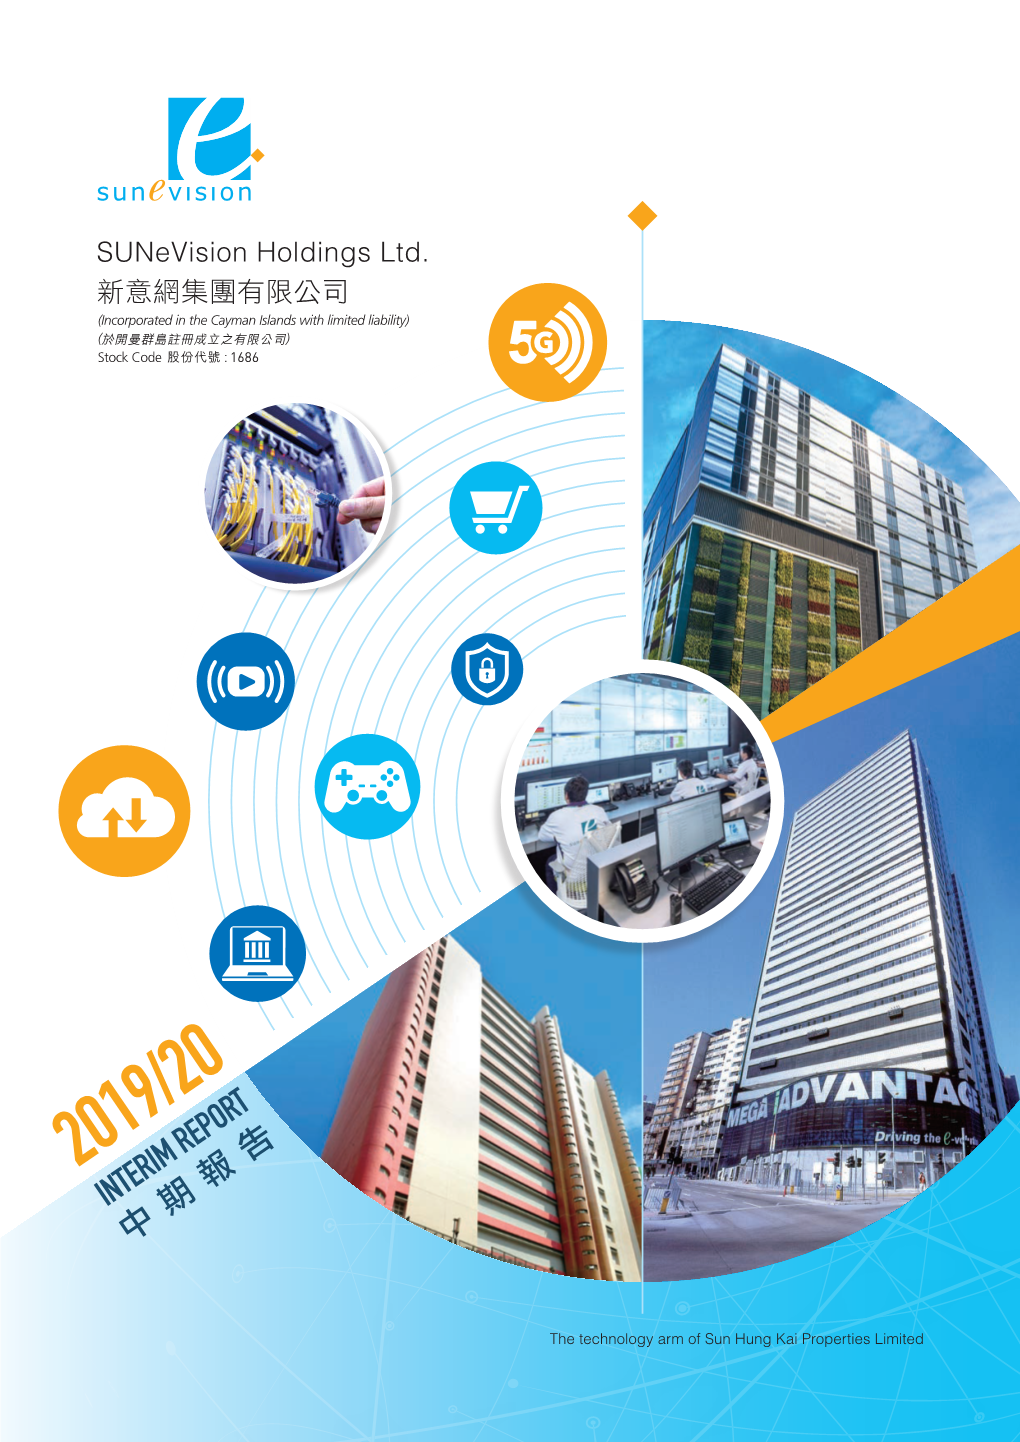 Interim Report Is Now Available in Printed Form in English and in Chinese, and on the Website of the Company